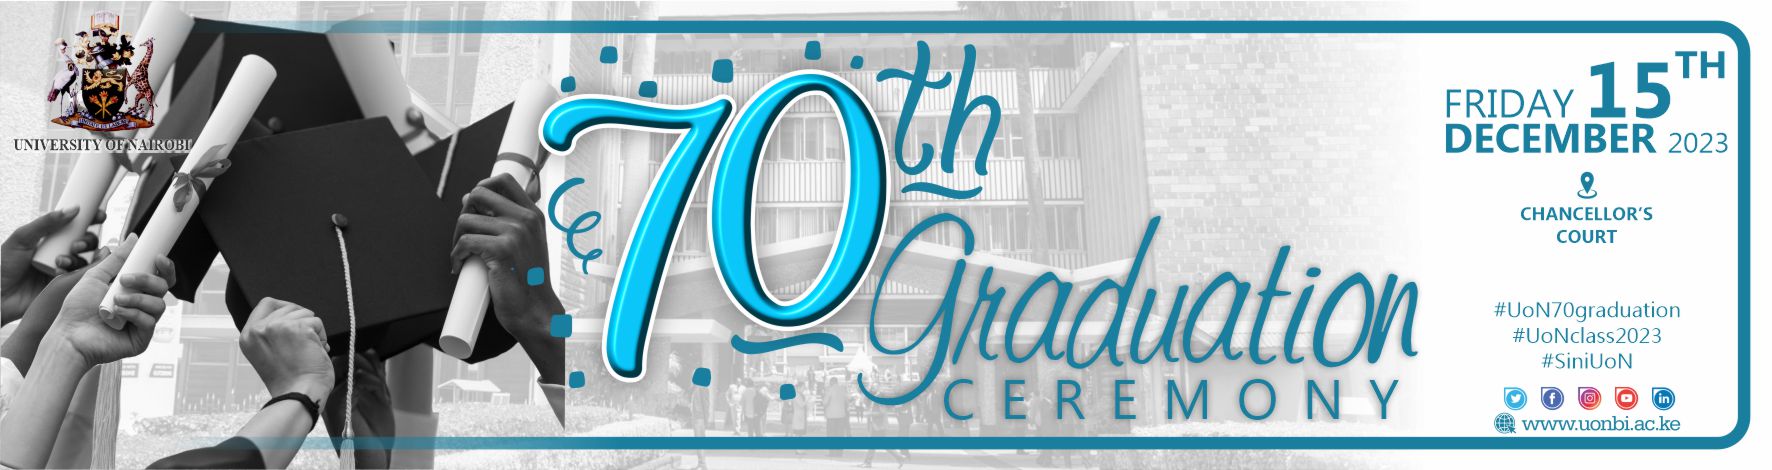 70th Graduation Ceremony on 15th December 2023 at Chancellor's Court